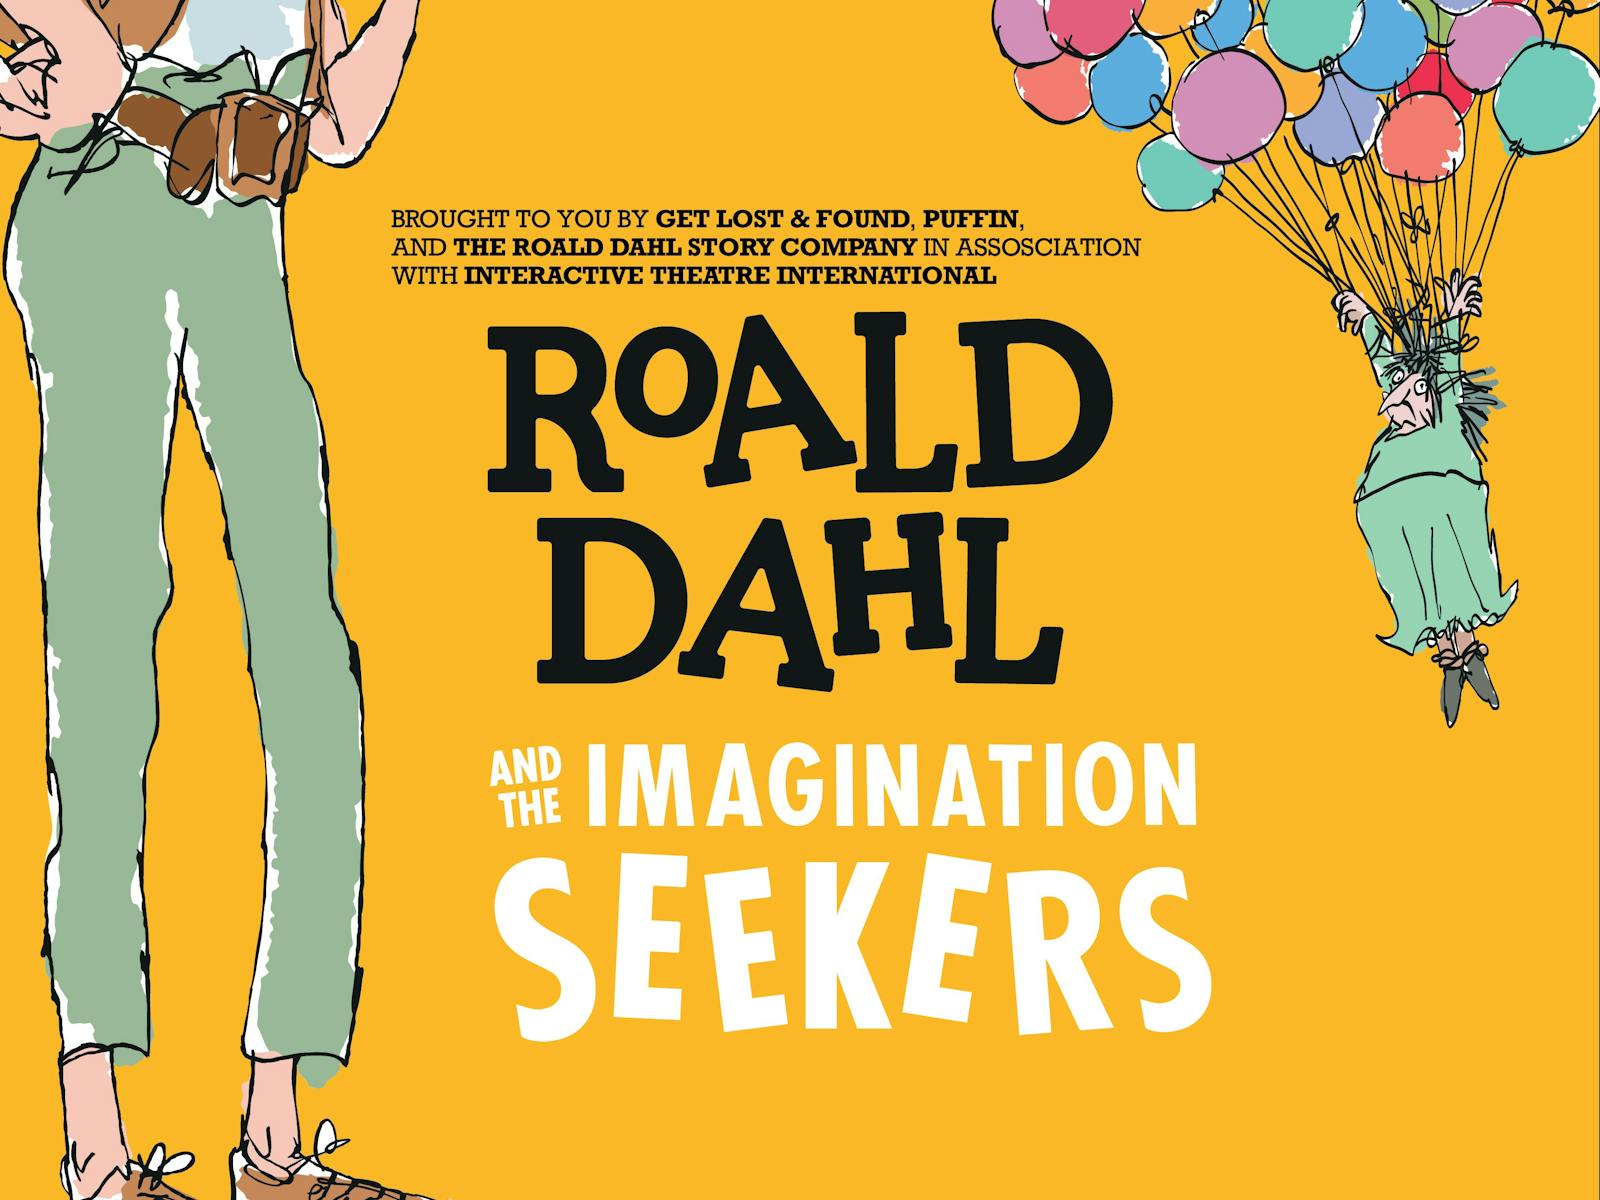 Image for Roald Dahl and The Imagination Seekers